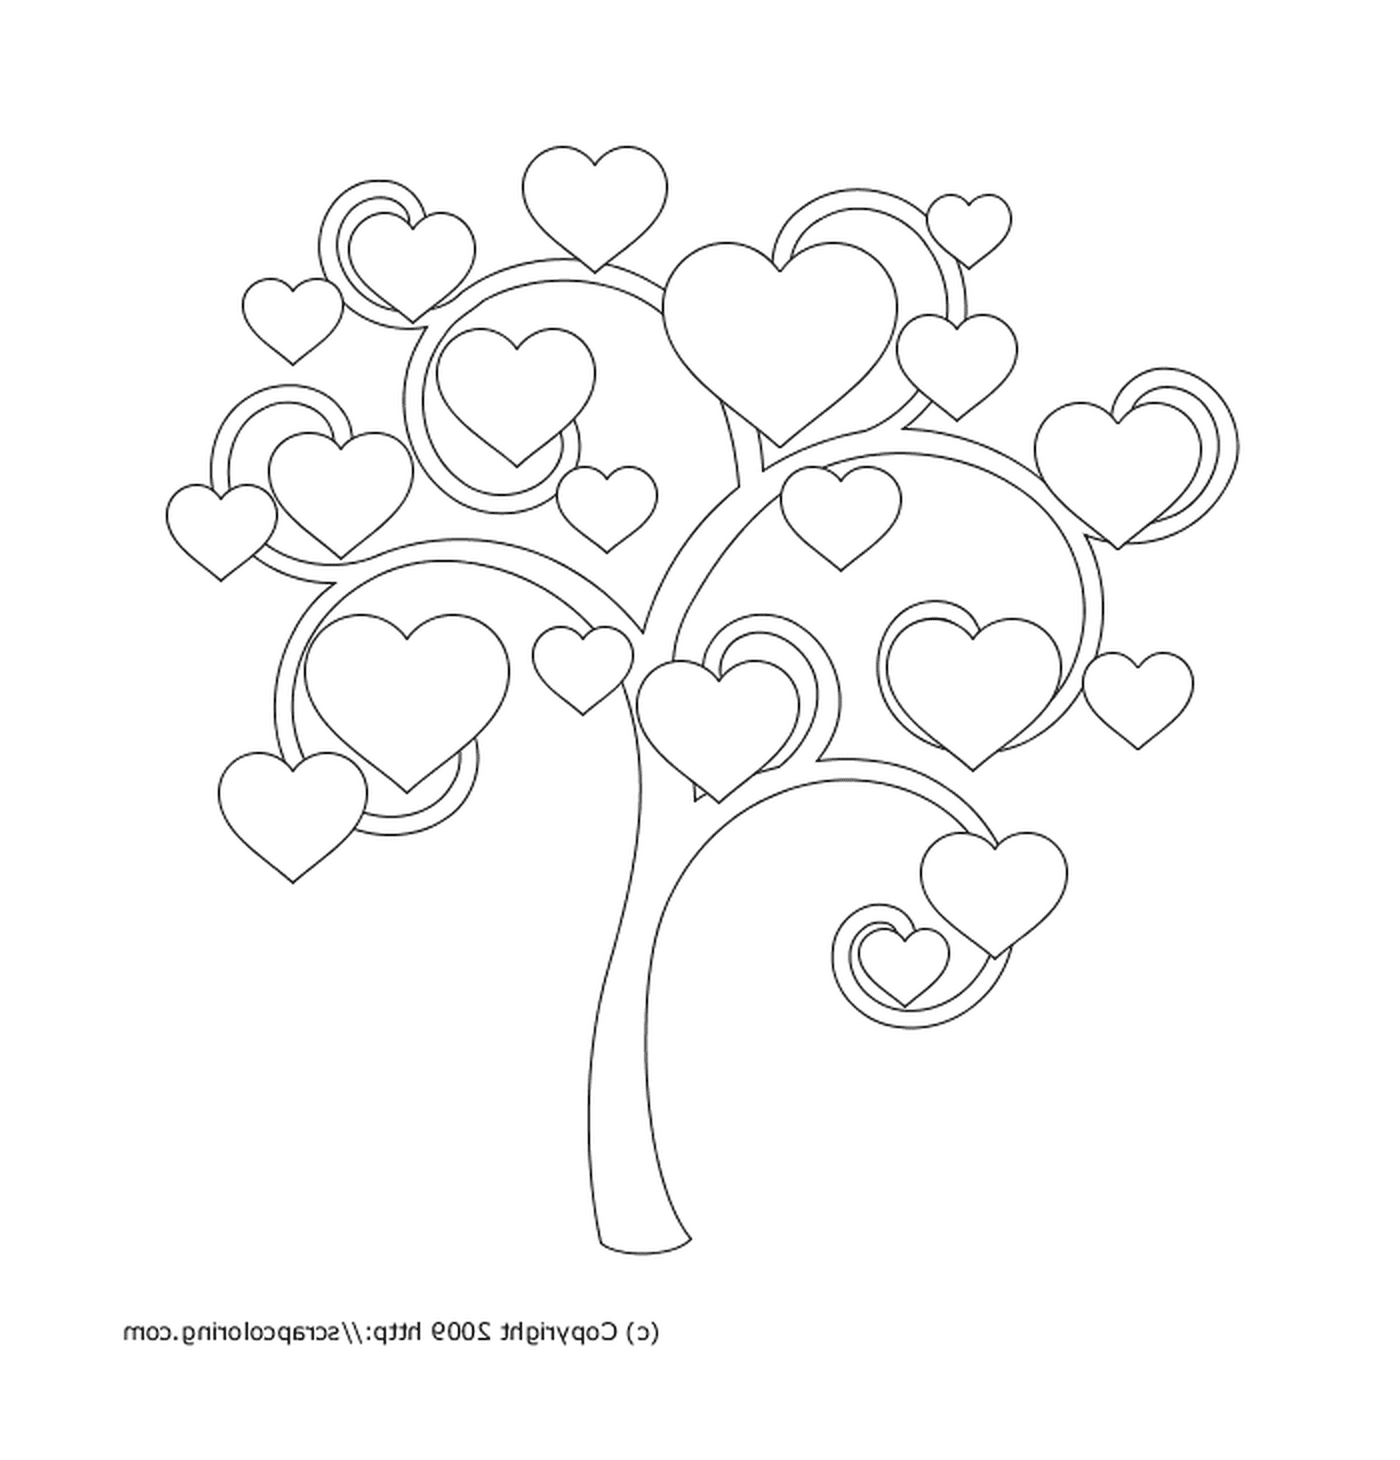  A tree with hearts 